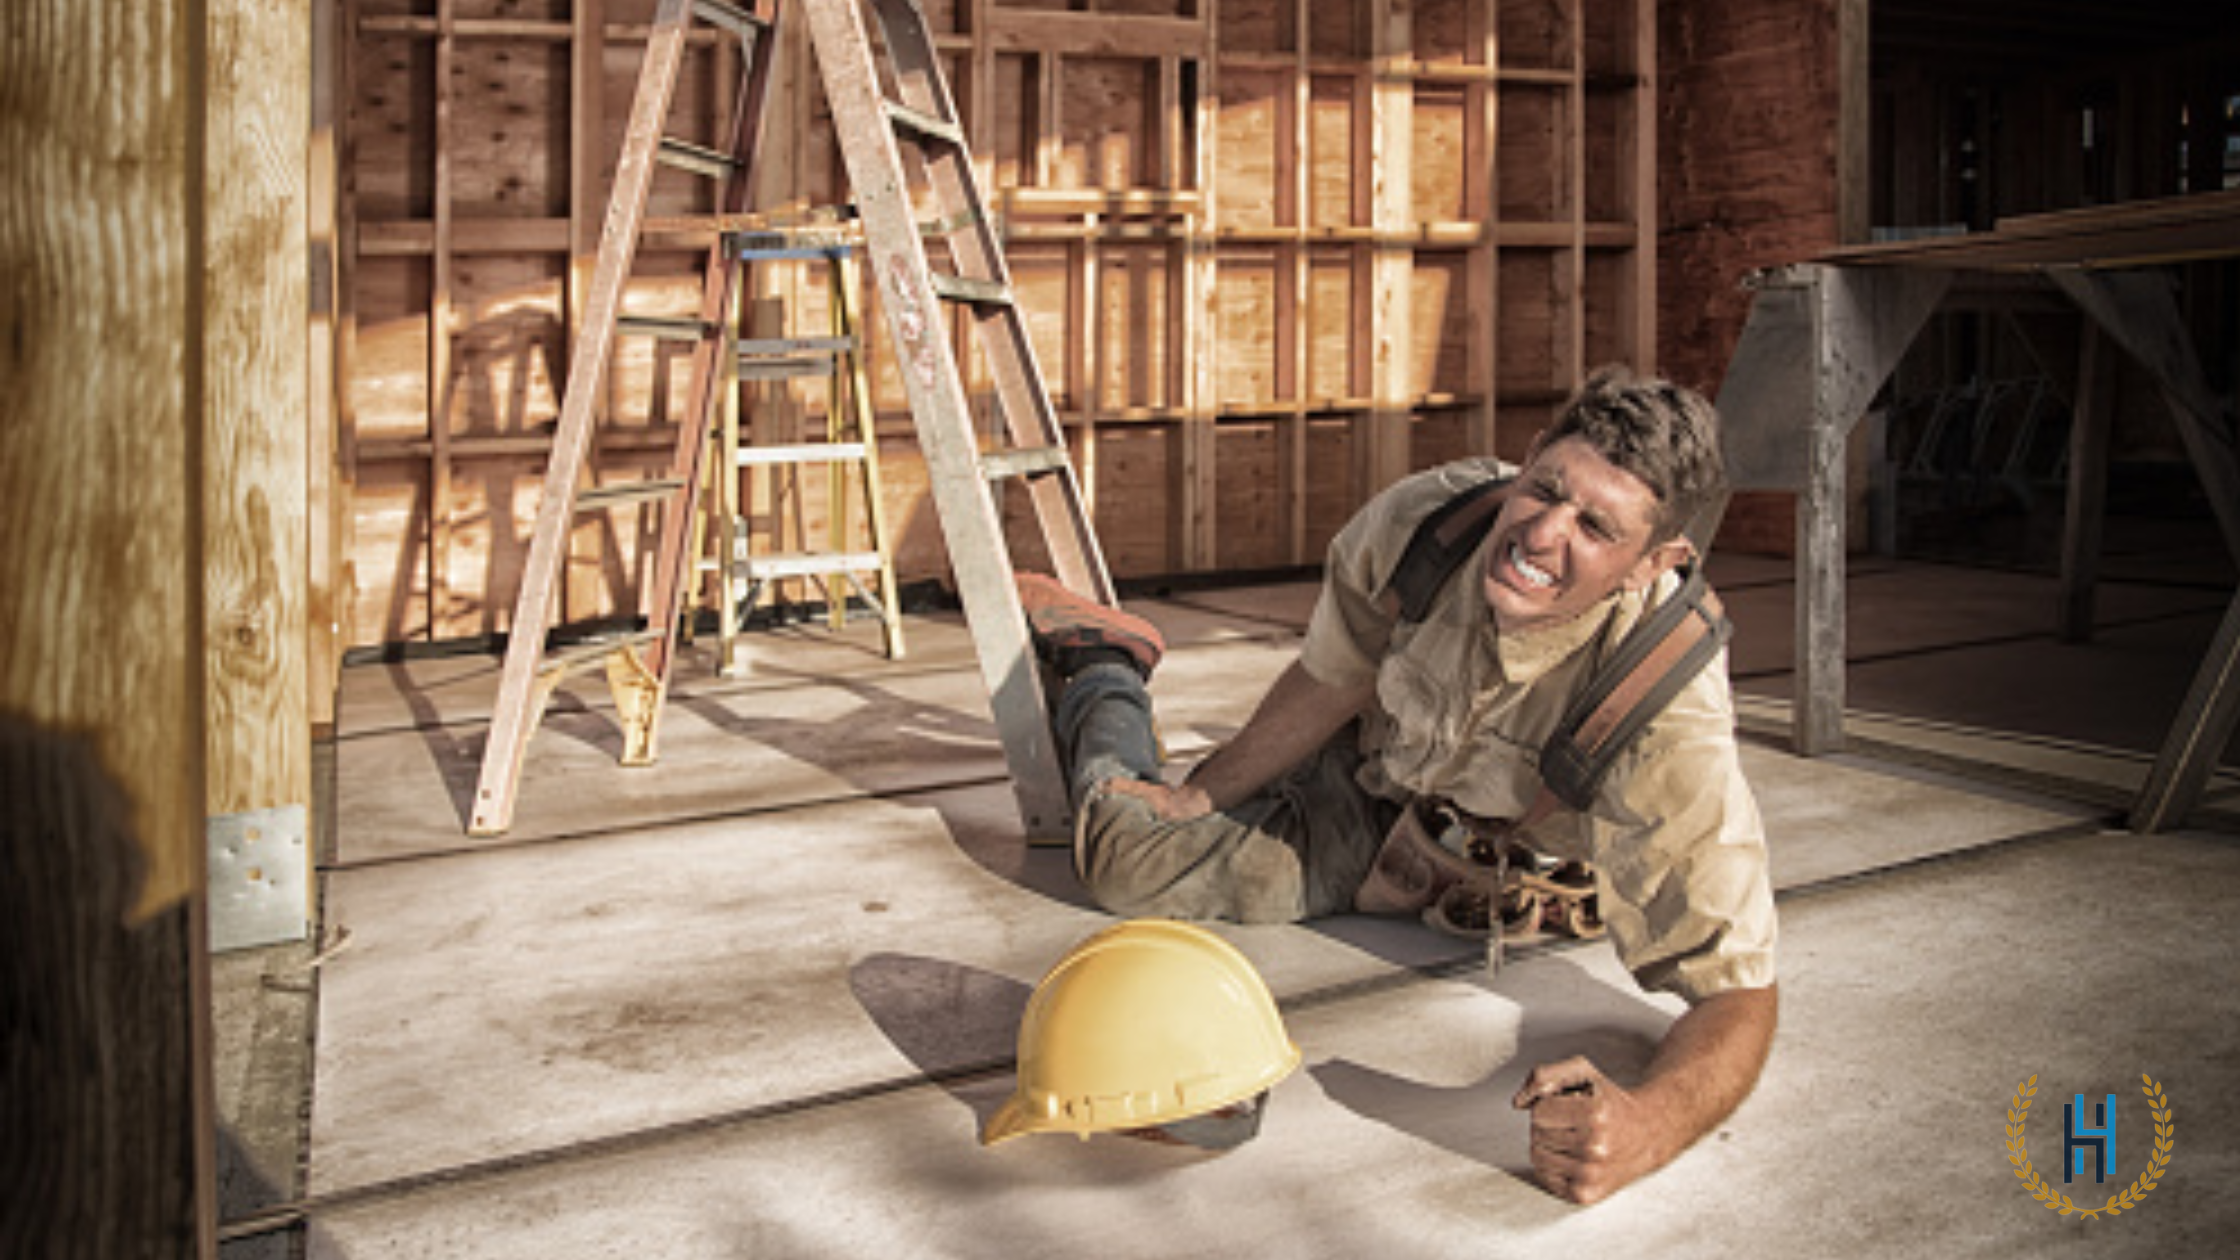 Workers' Compensation Claim | 2H Law